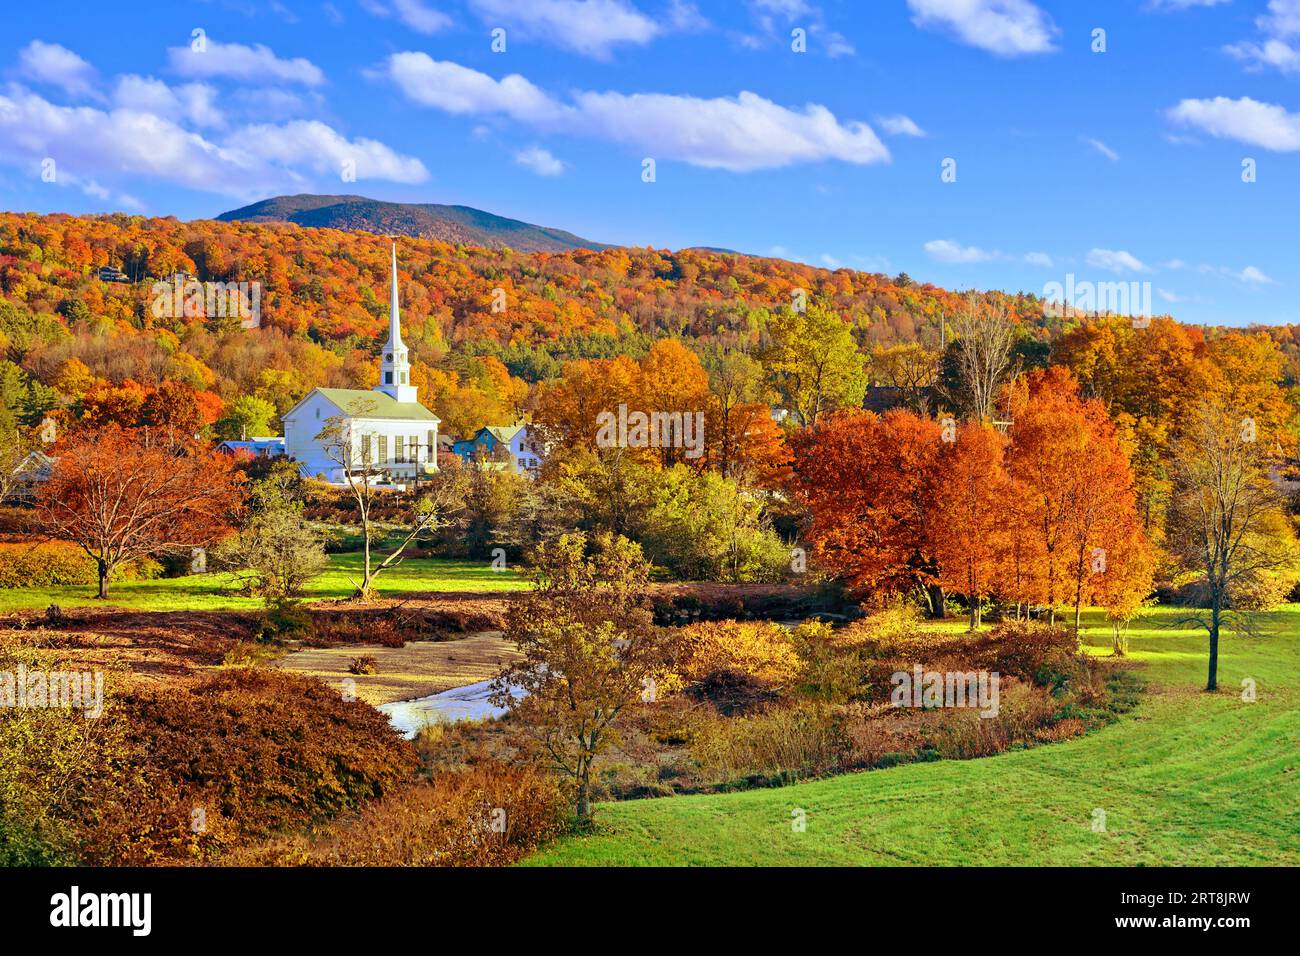 Autumn countryside view of the town of Stowe with white church and fall colors, Vermont, USA Stock Photo